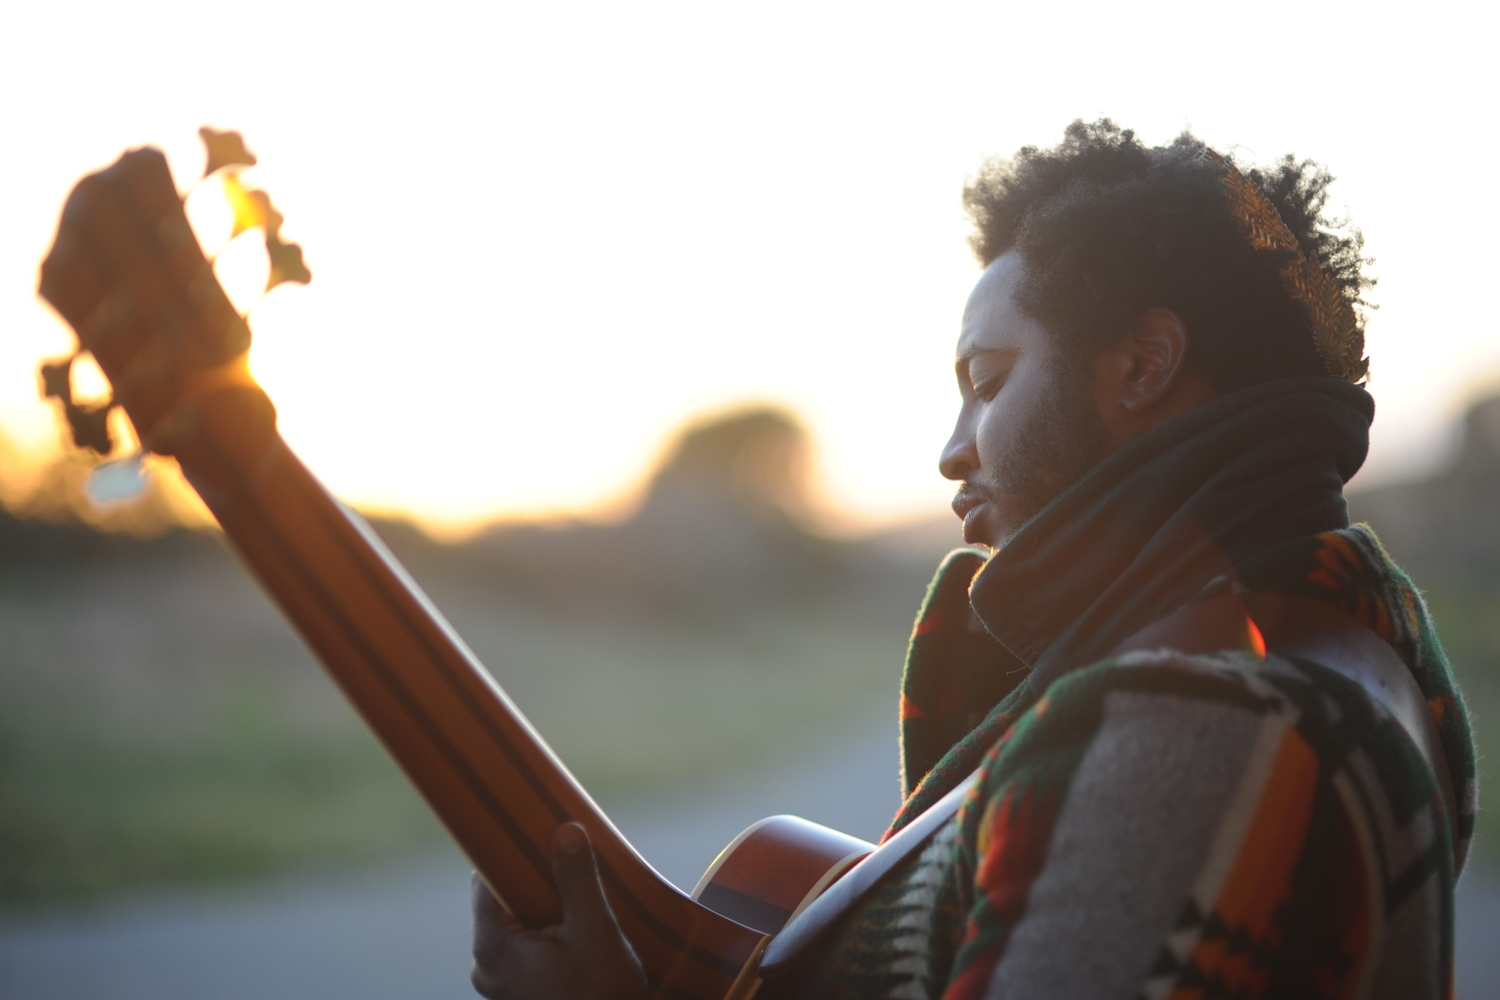 Thundercat’s new album ‘Drunk’ will feature Kendrick Lamar and Flying Lotus